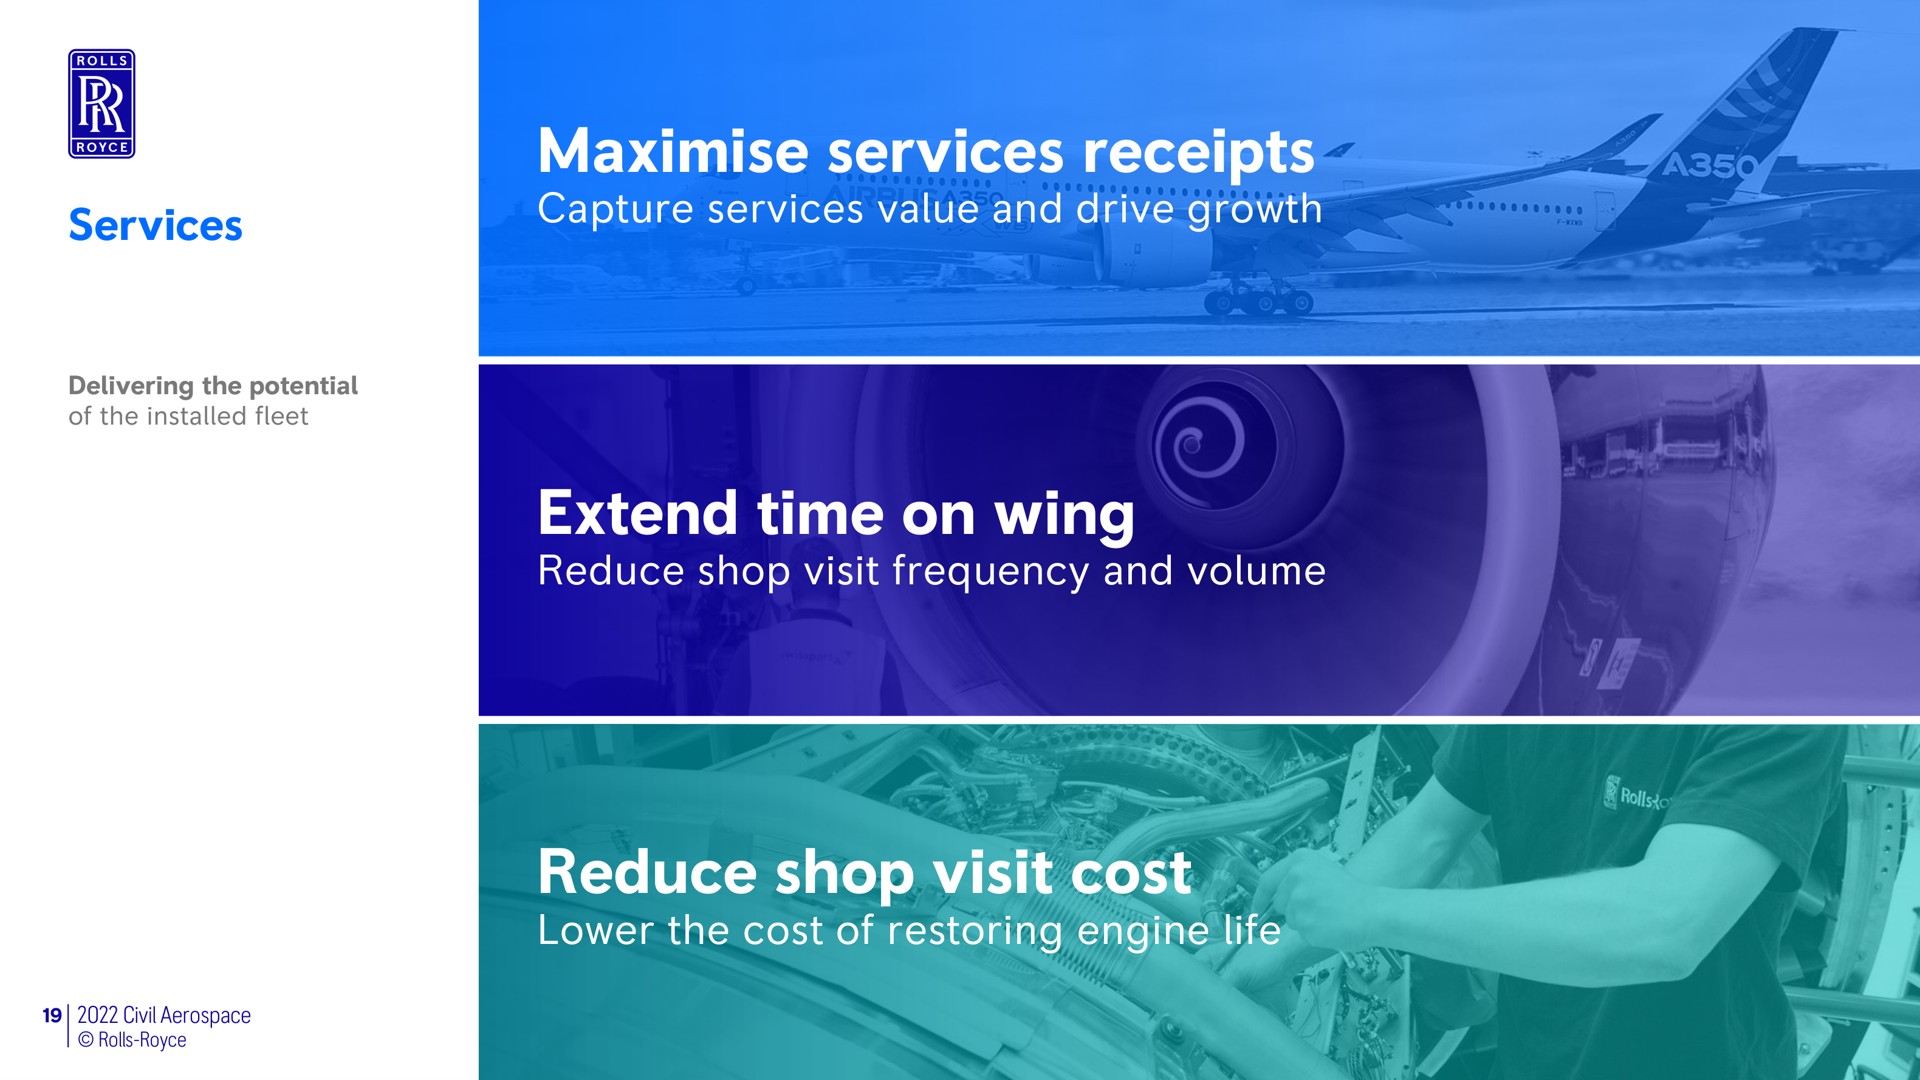 services services receipts capture services value and drive growth extend time on wing reduce shop visit frequency and volume reduce shop visit cost lower the cost of restoring engine life | Rolls-Royce Holdings